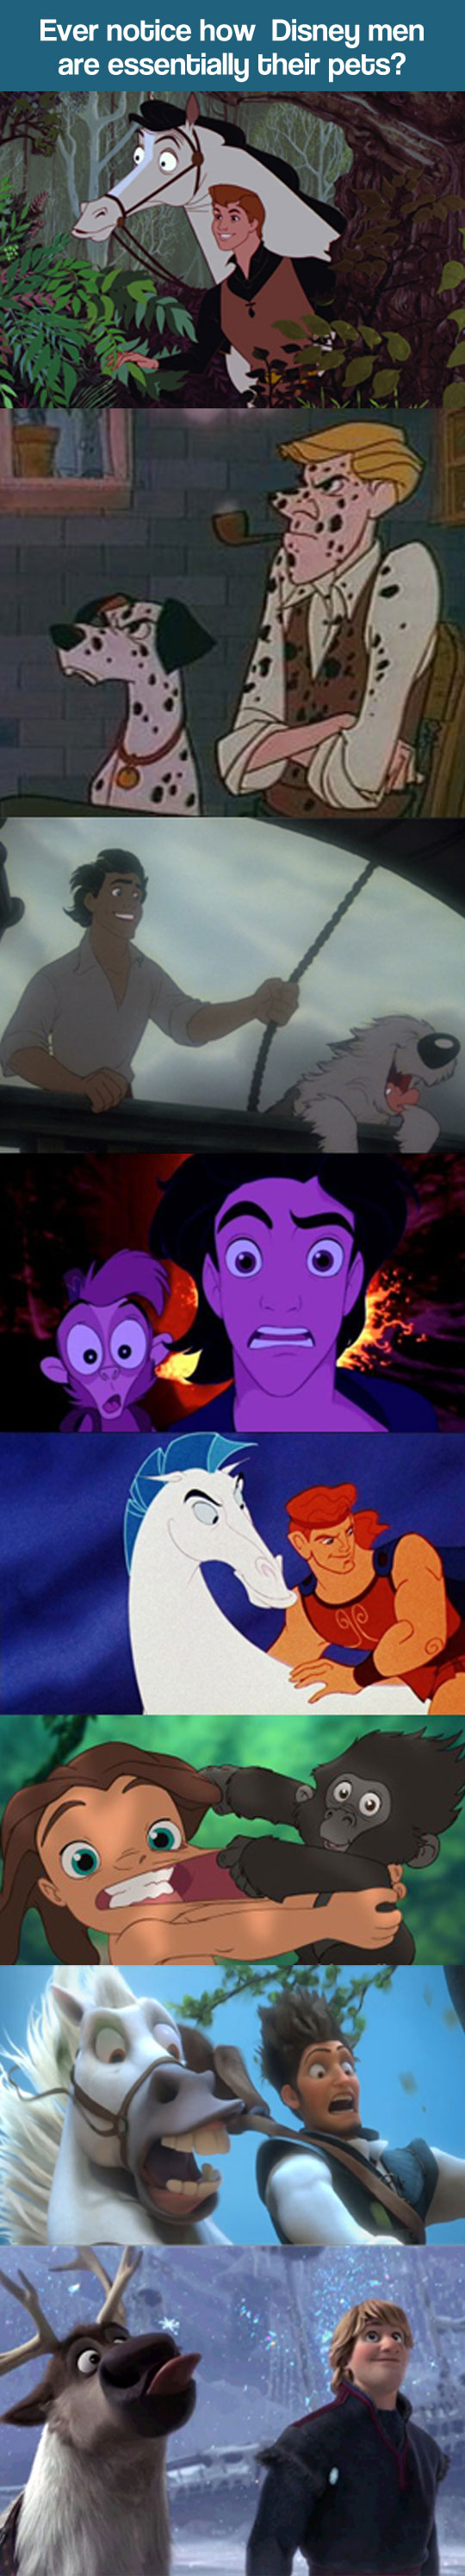 Disney men and their pets.